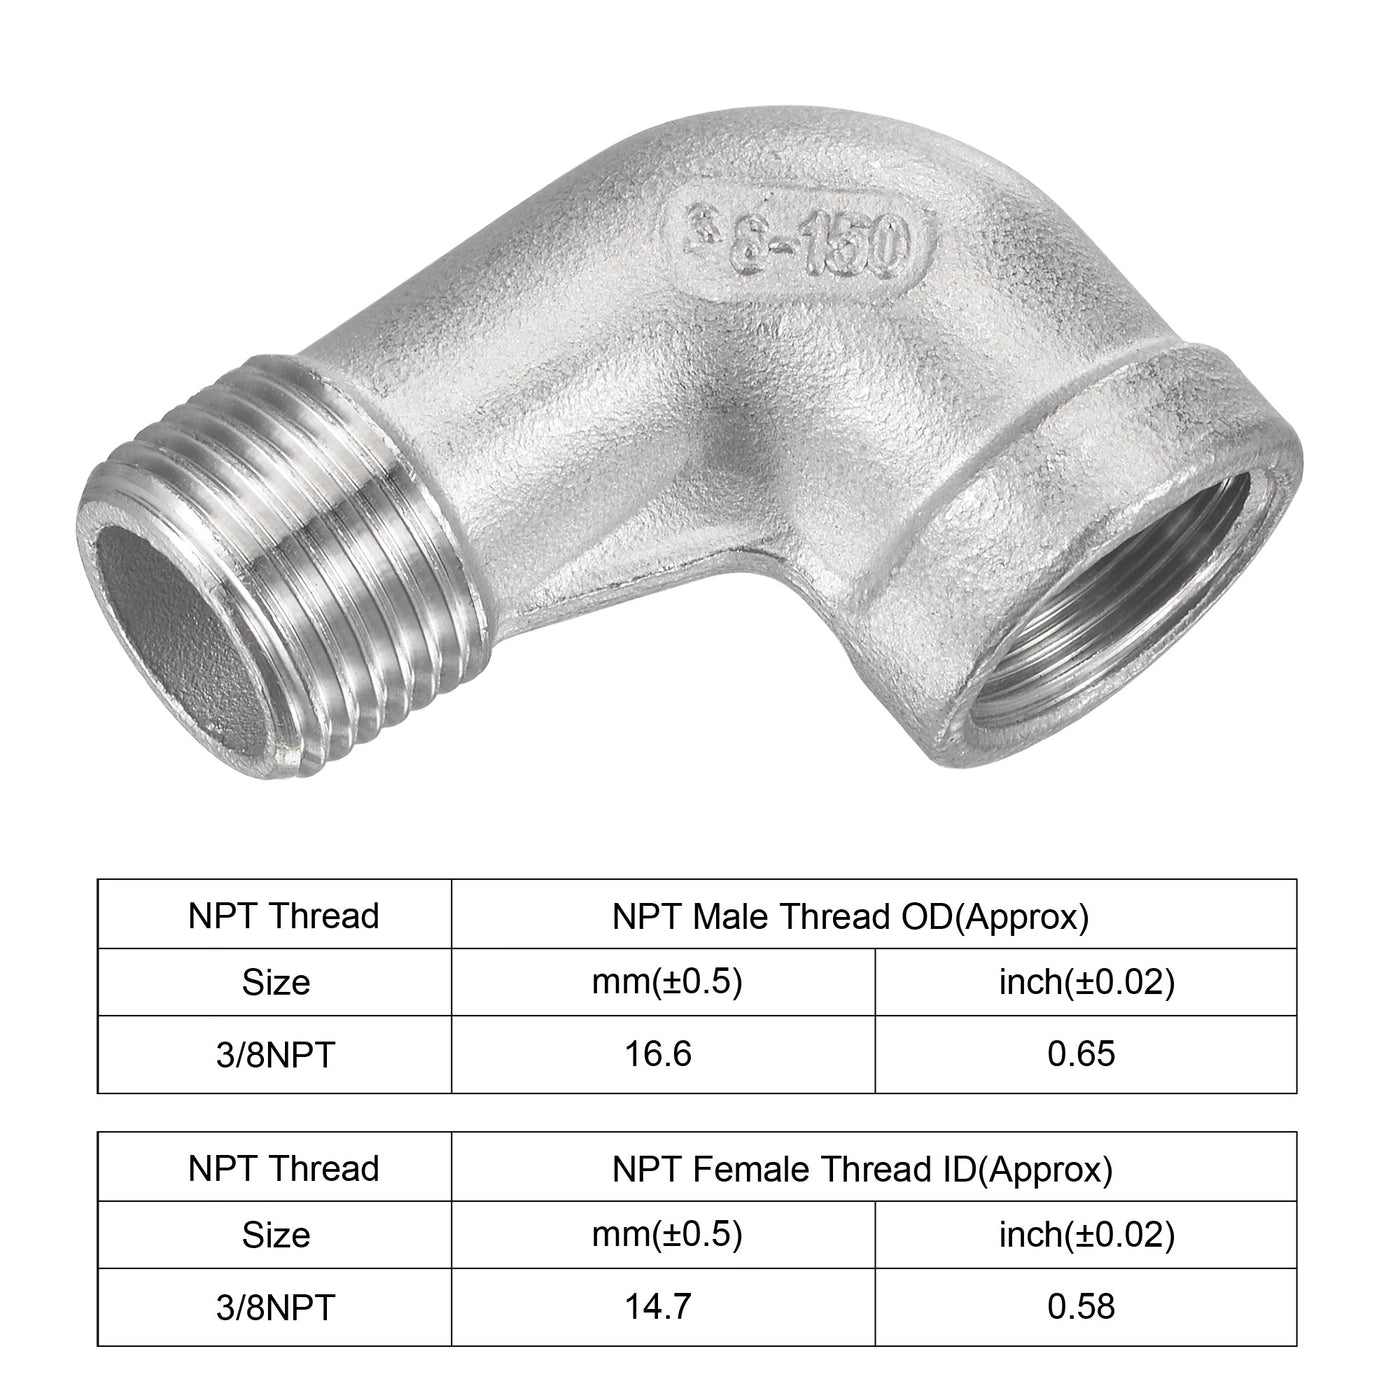 Uxcell Uxcell Pipe Fitting Elbow 1/4 NPT Male to Female Thread Hose Connector Adapter, 304 Stainless Steel